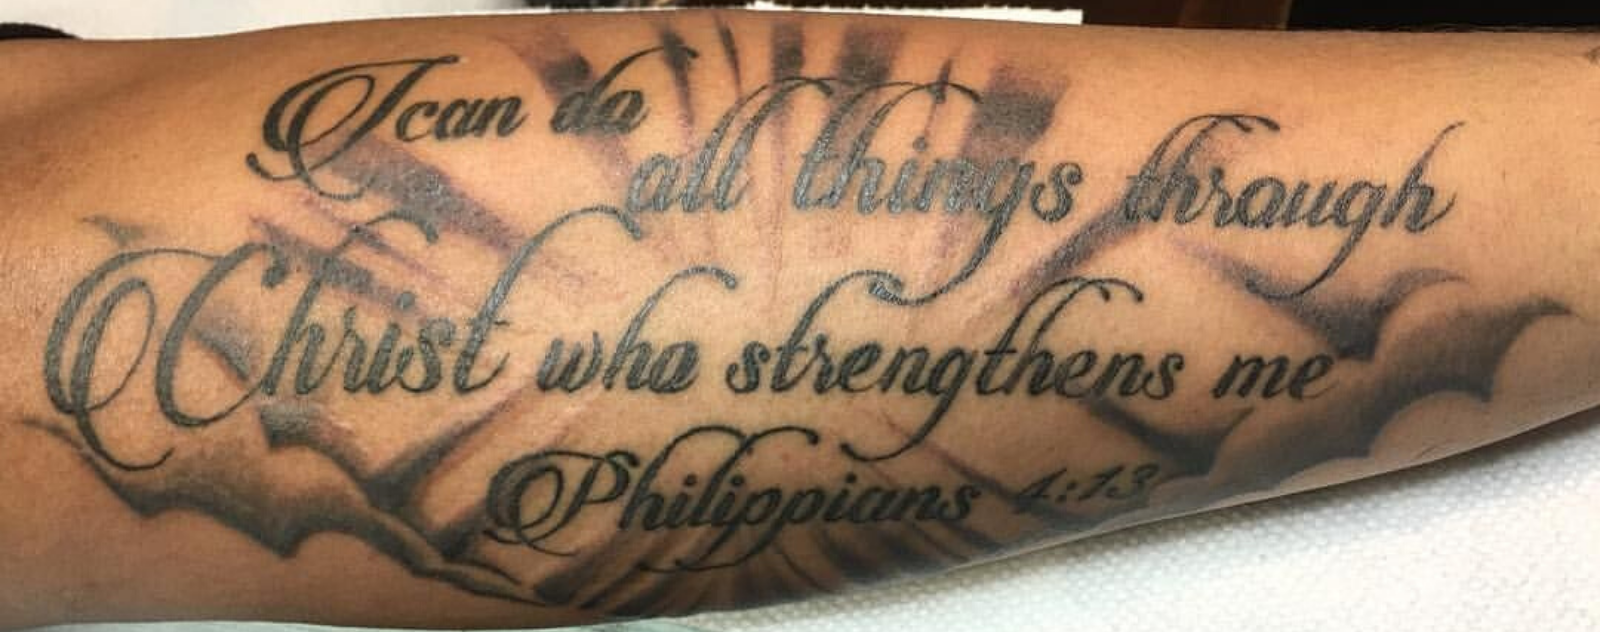 philippians-4-13-tattoo-forearm-1.png